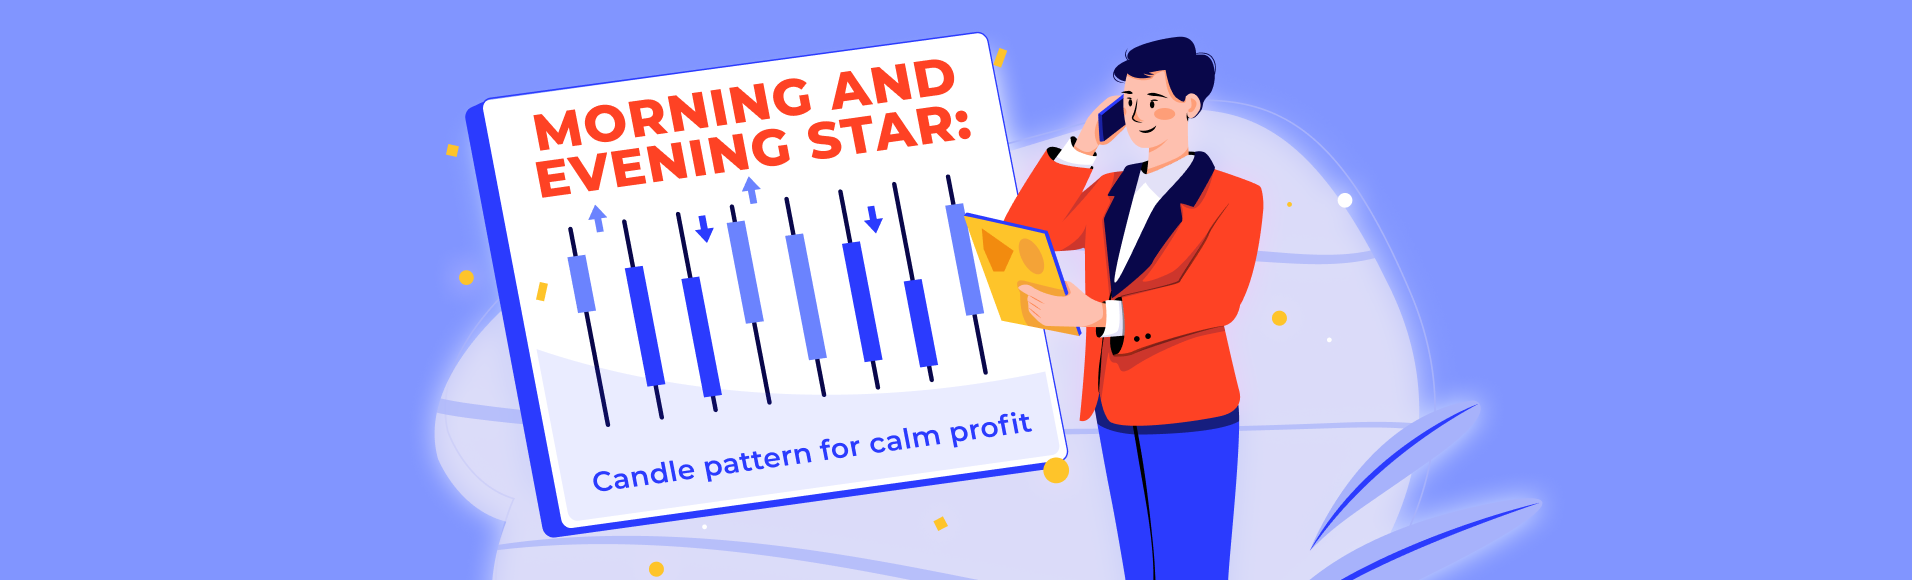 Morning and Evening Star: pattern for calm profit